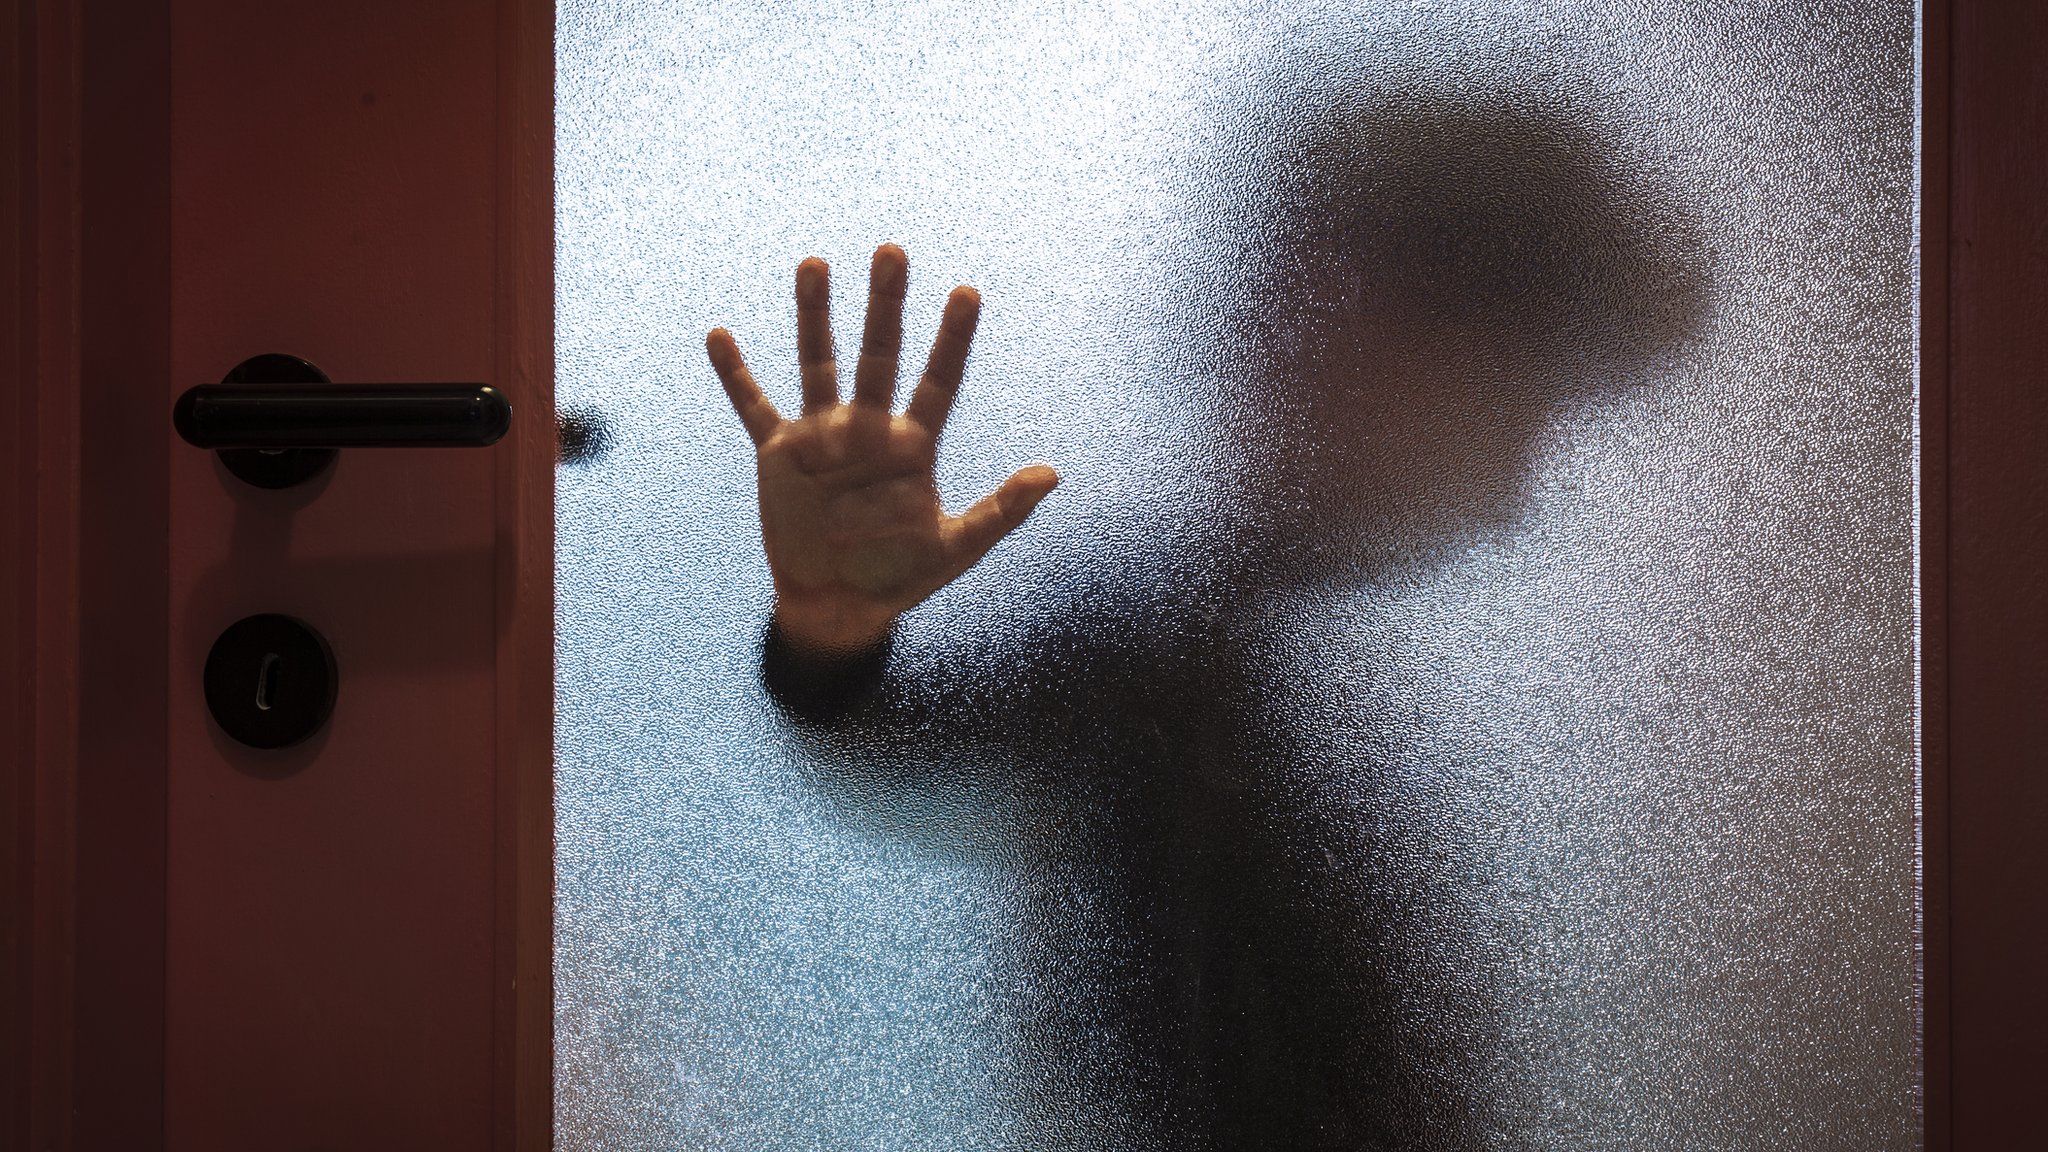 Blurred picture of child's hand against a door